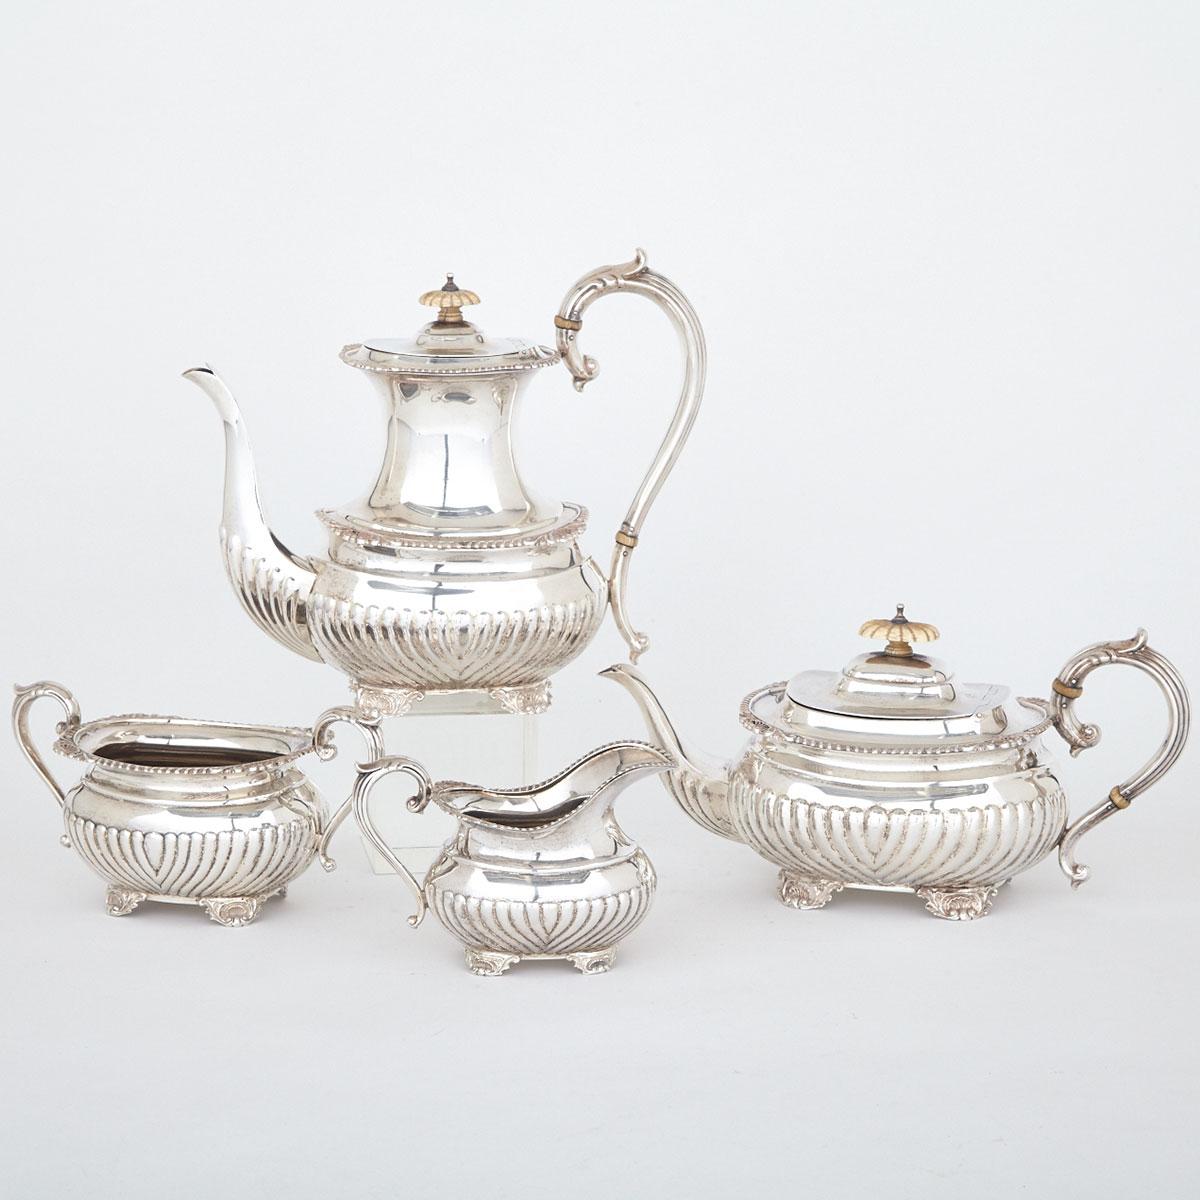 Canadian Silver Coffee and Tea Service, Henry Birks & Sons, Montreal, Que., 1954-56